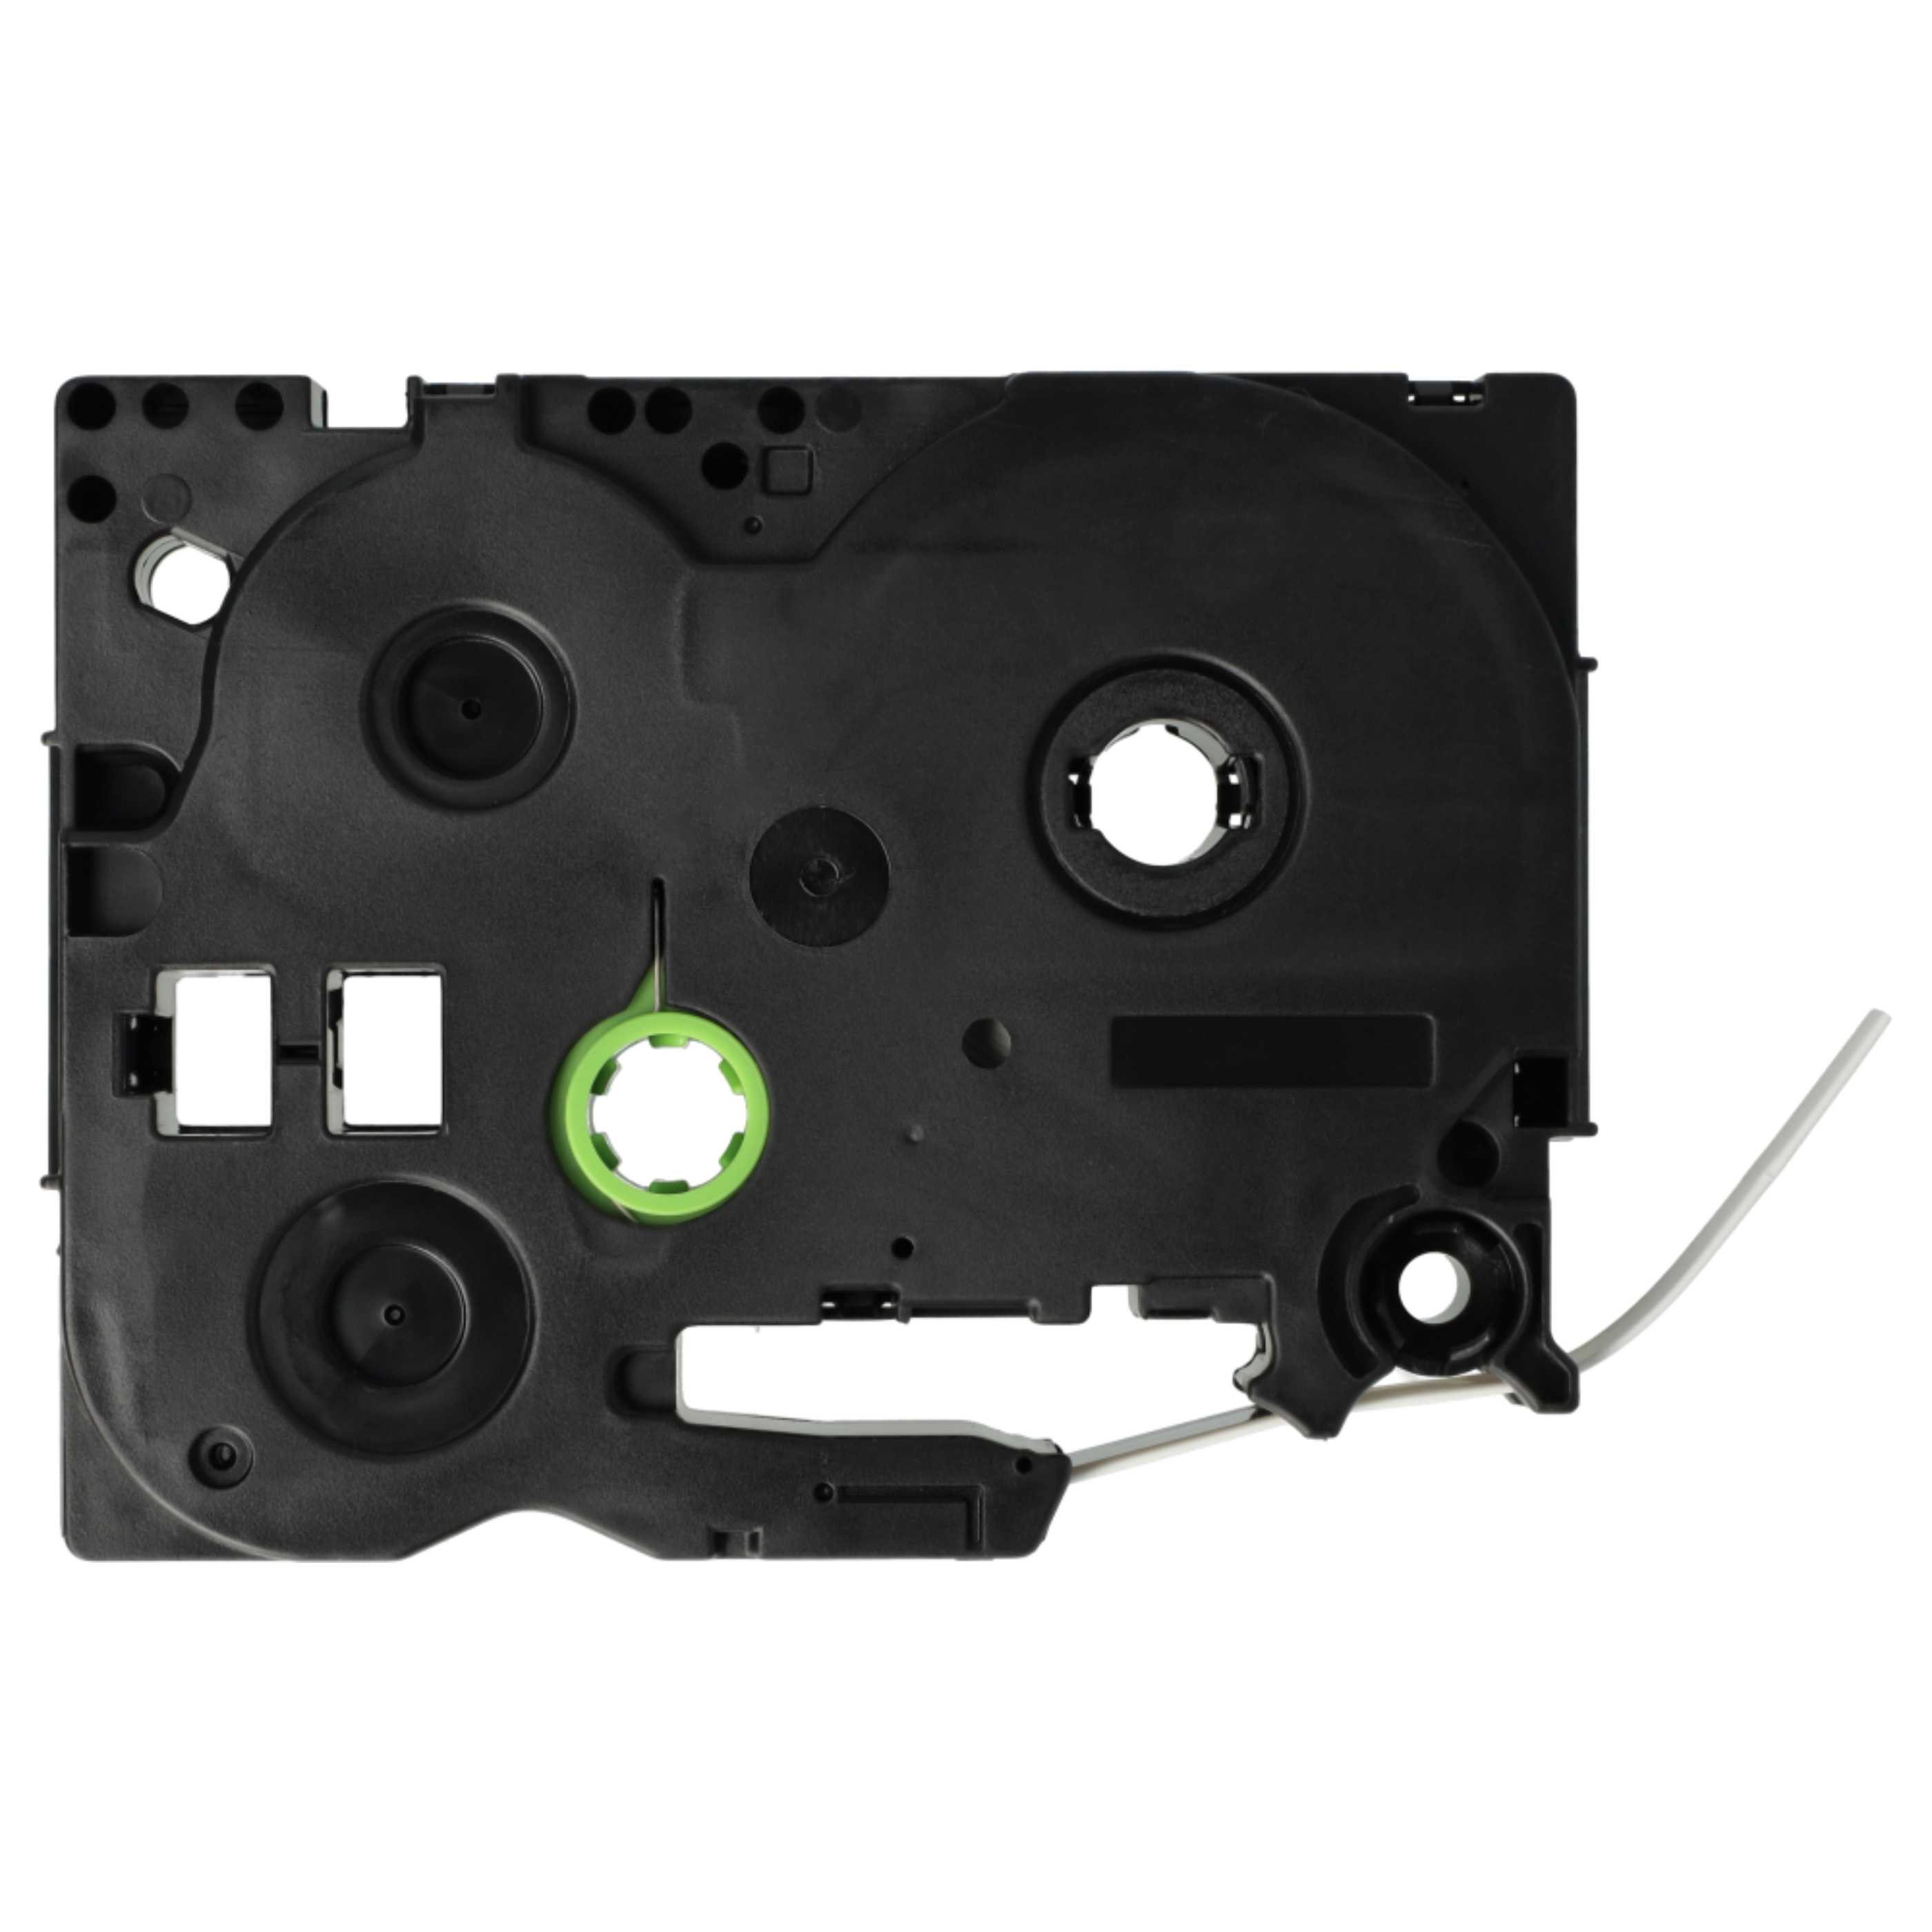 Label Tape as Replacement for Brother AHS-221, HS-221, HS221 - Black to White, Heat Shrink Tape, 8.8 mm